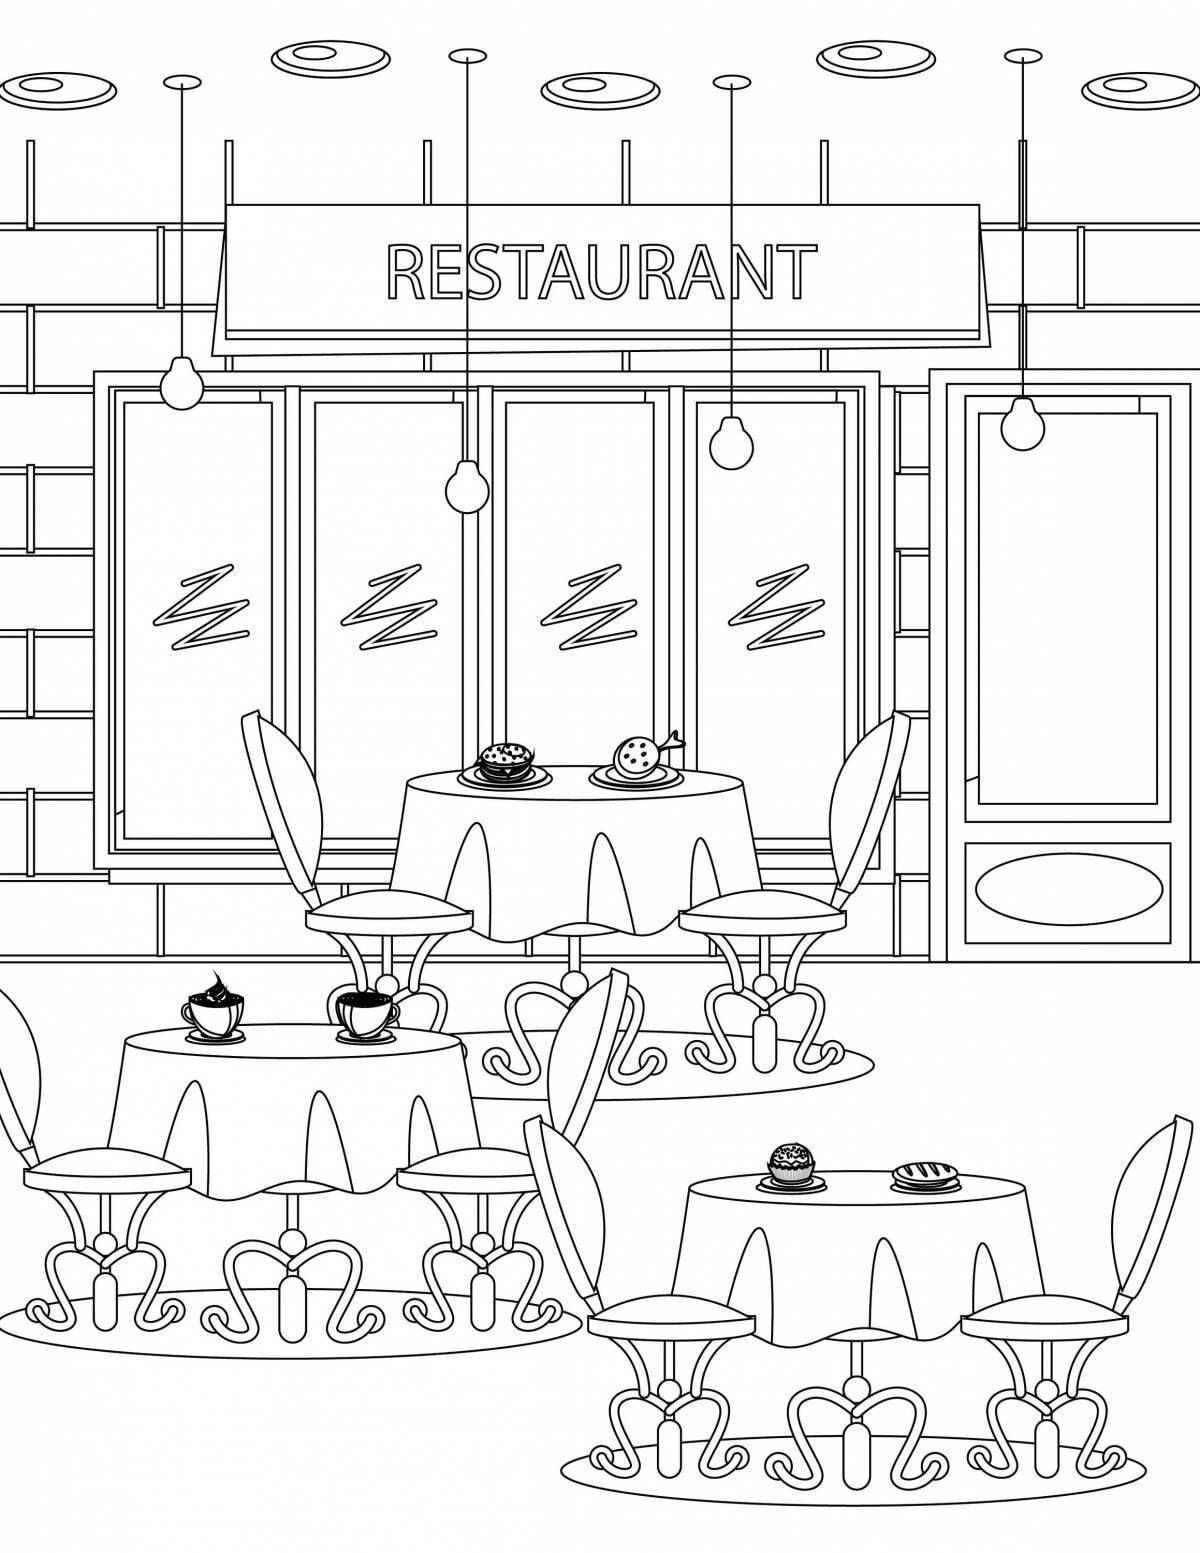 Uplifting restaurant coloring page